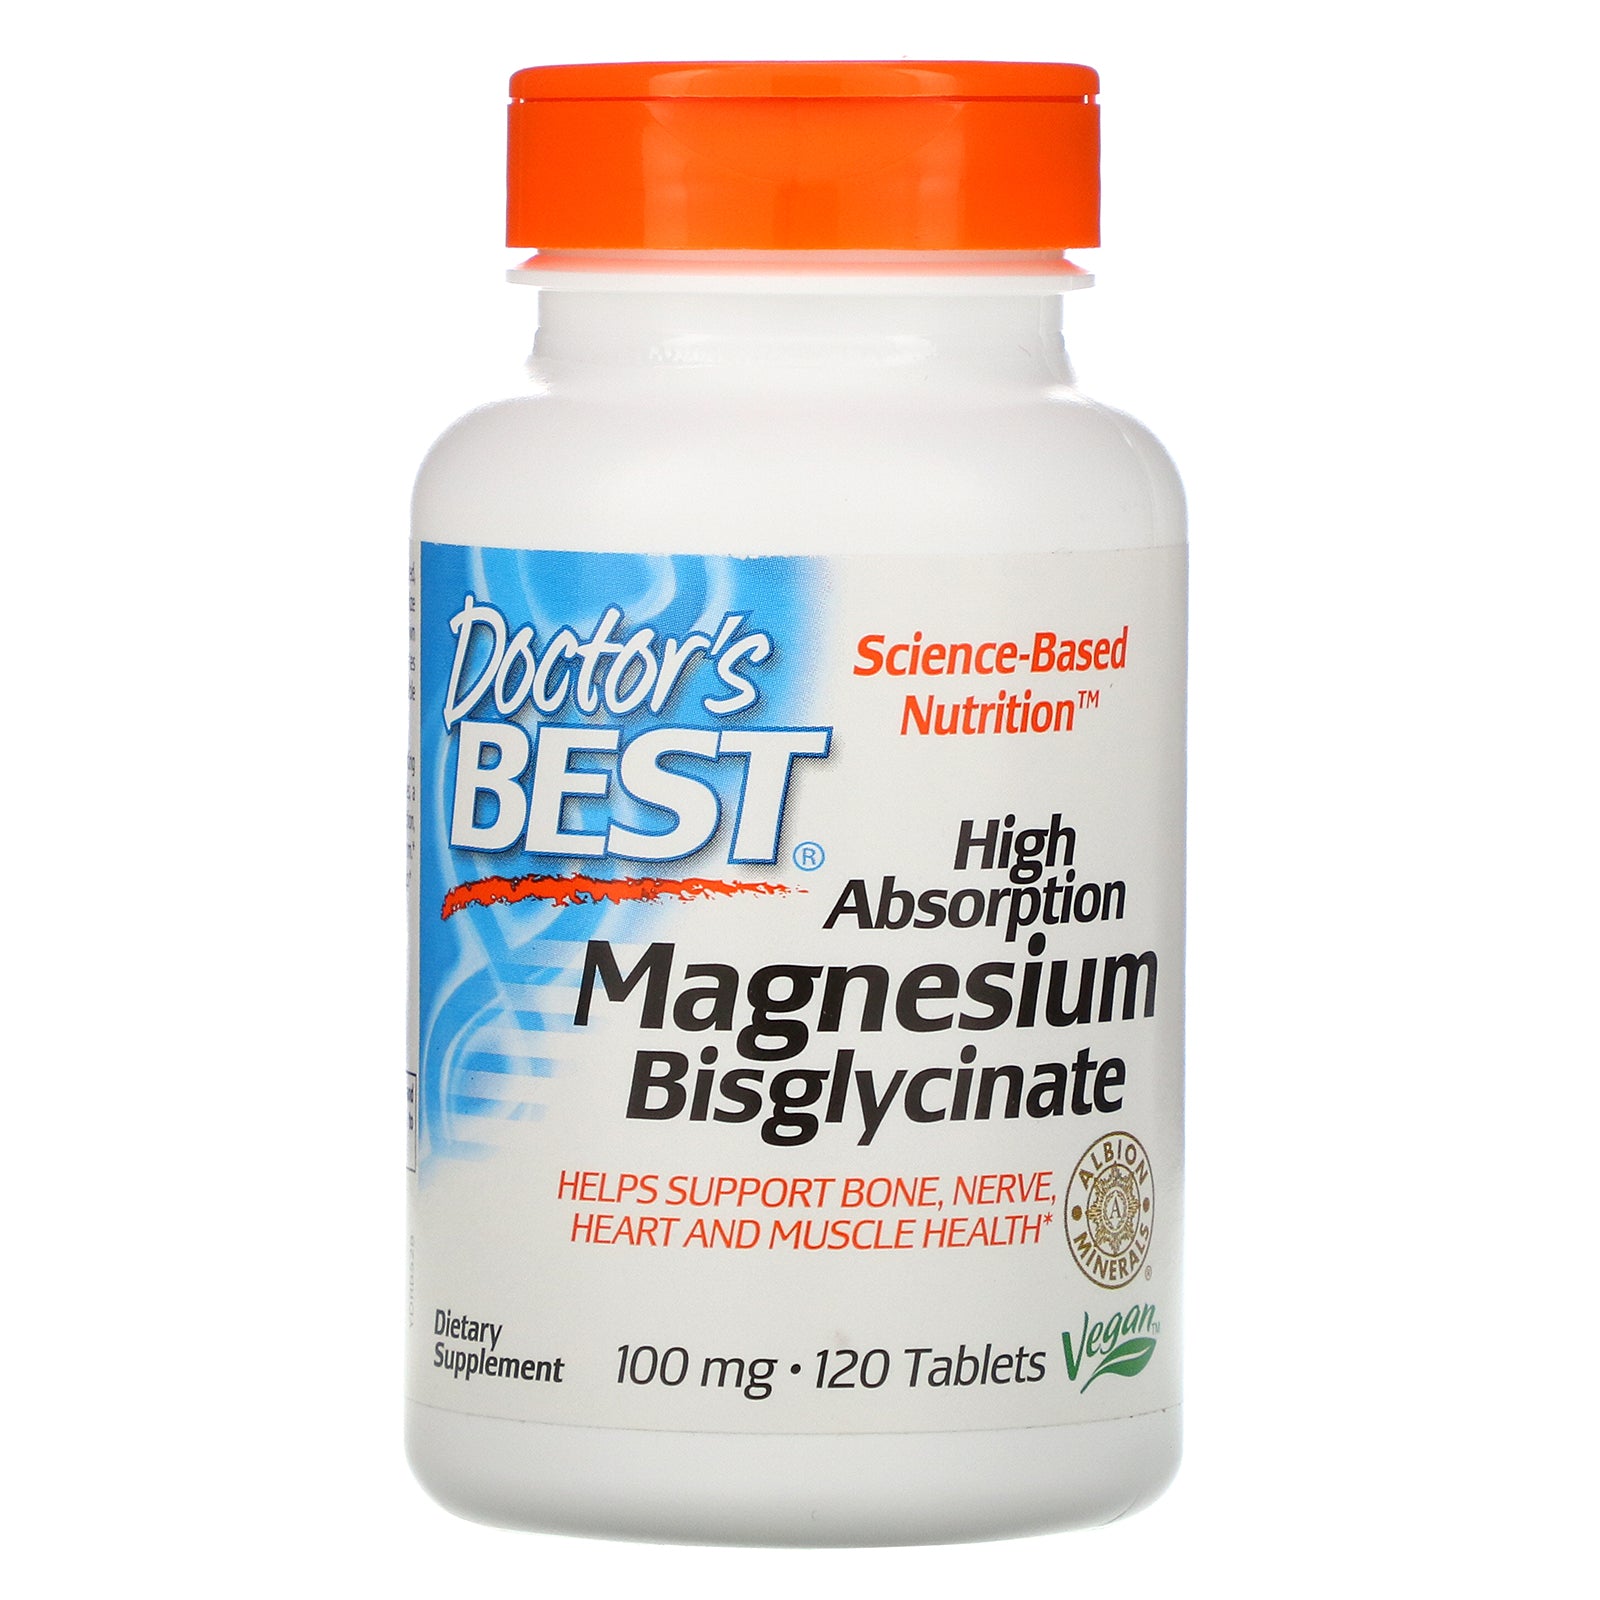 Doctor's Best, High Absorption Magnesium Bisglycinate, 100 mg, 120 Tablets